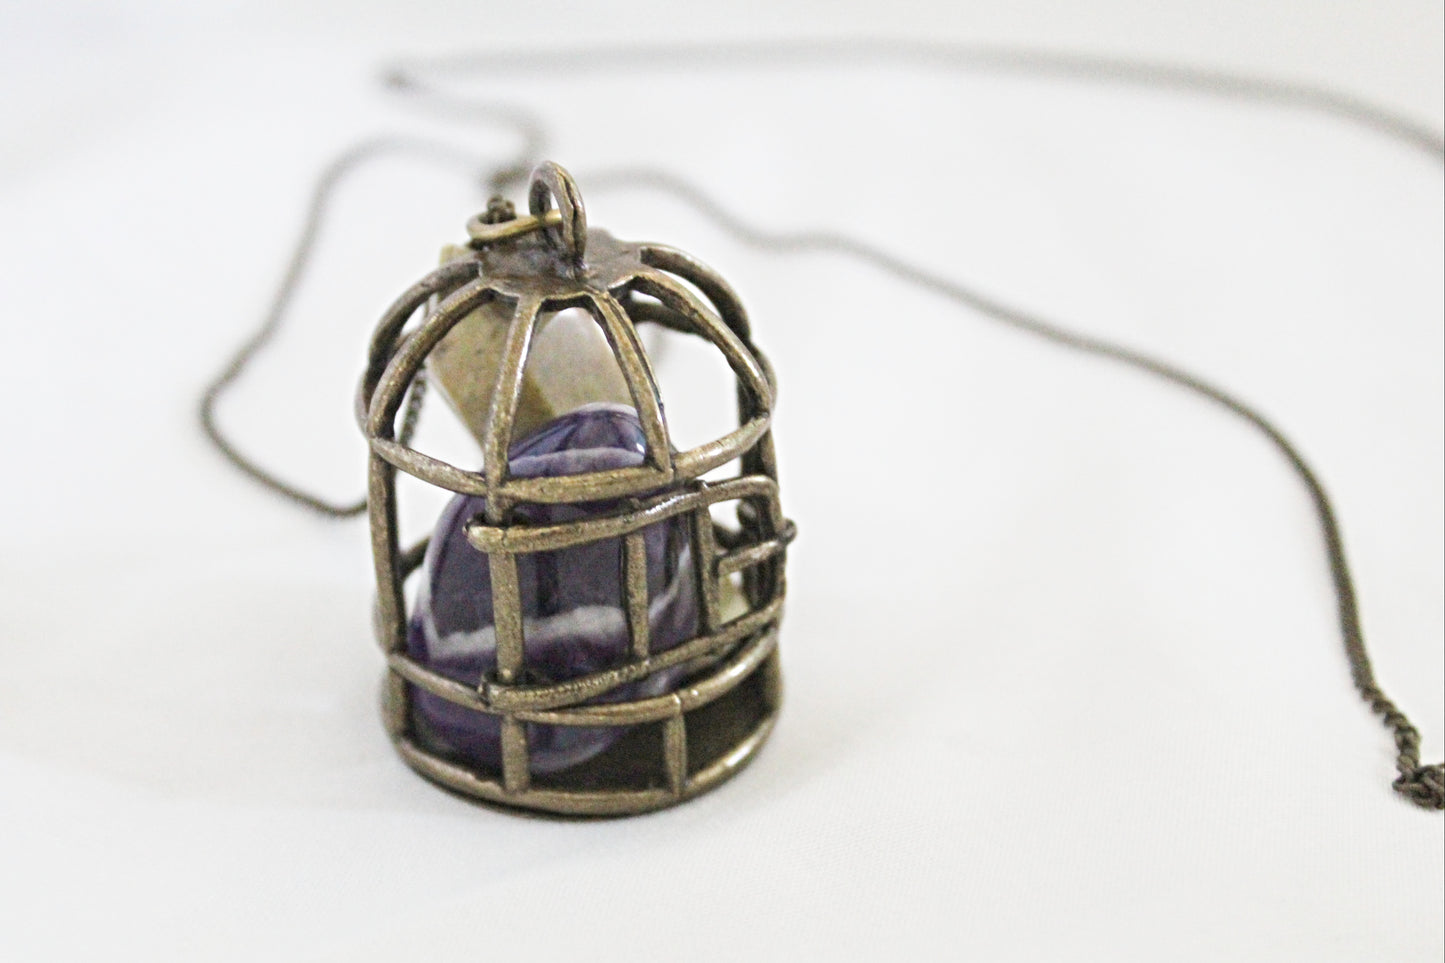 Birdcage Crystal Necklace featuring Serpentine and Chevron Amethyst